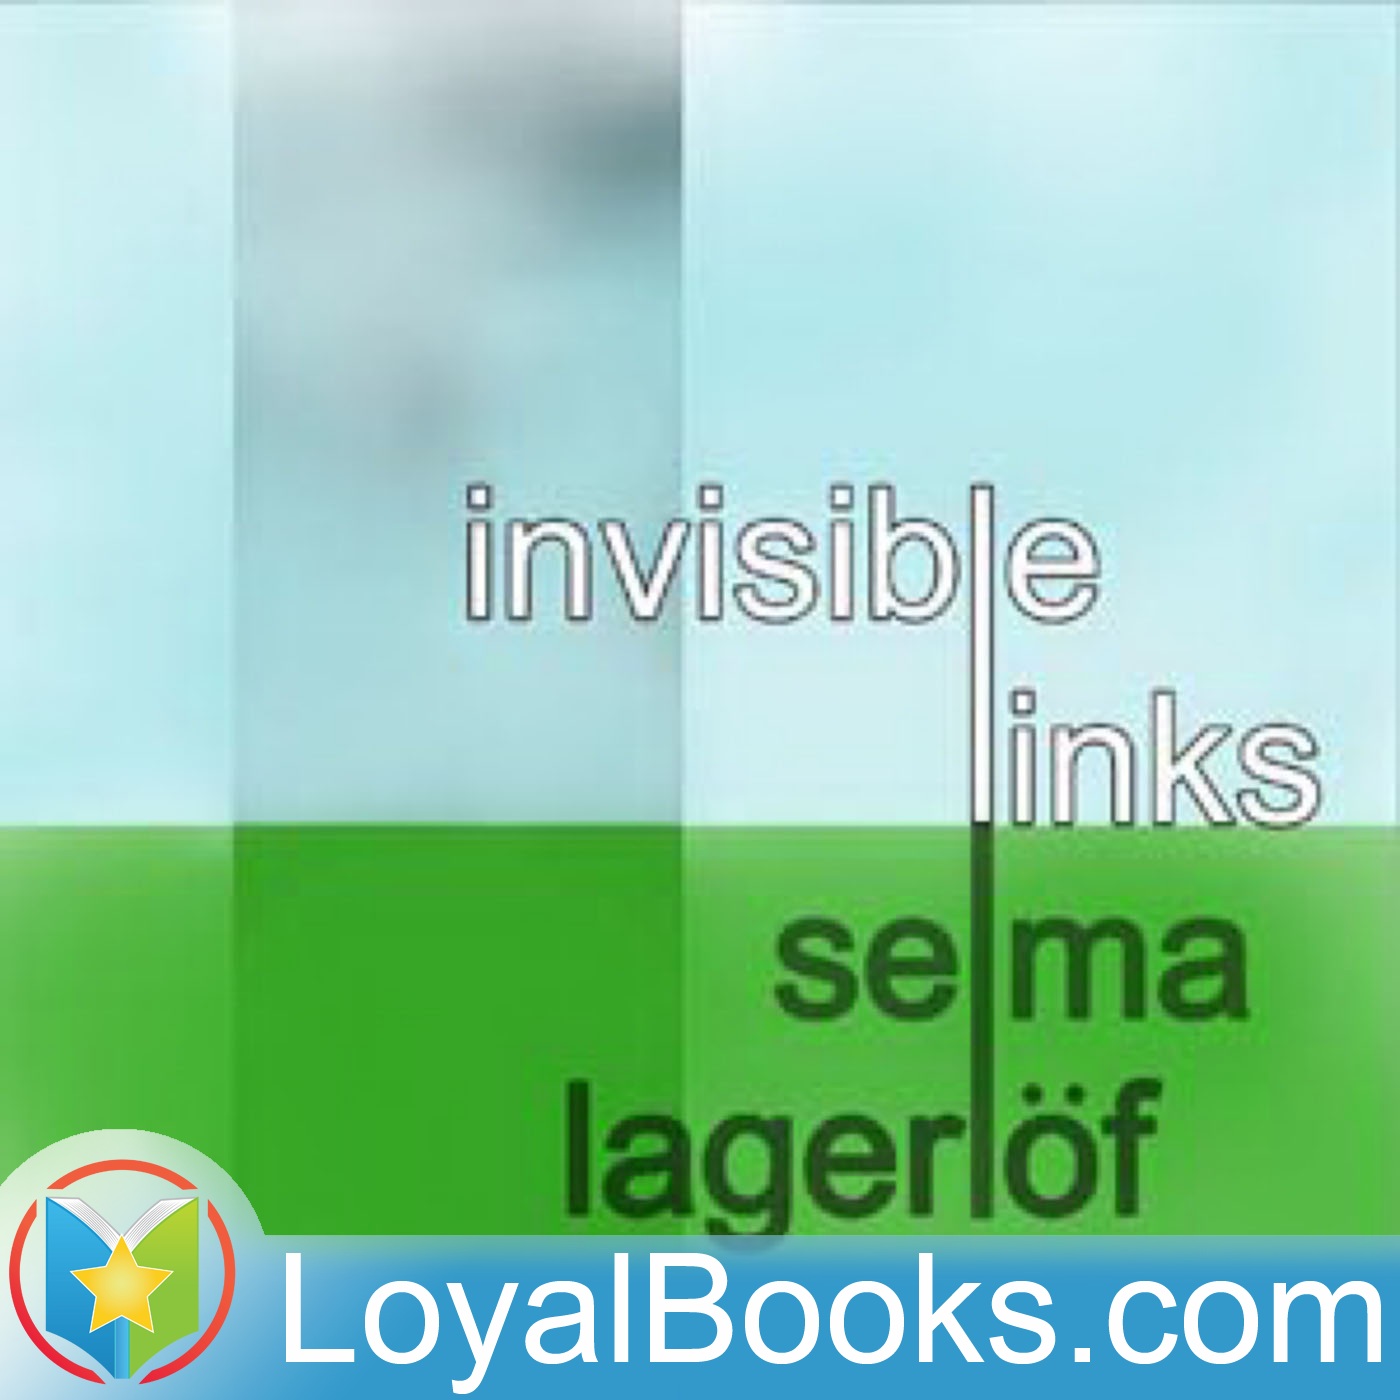 Invisible Links by Selma Lagerlöf